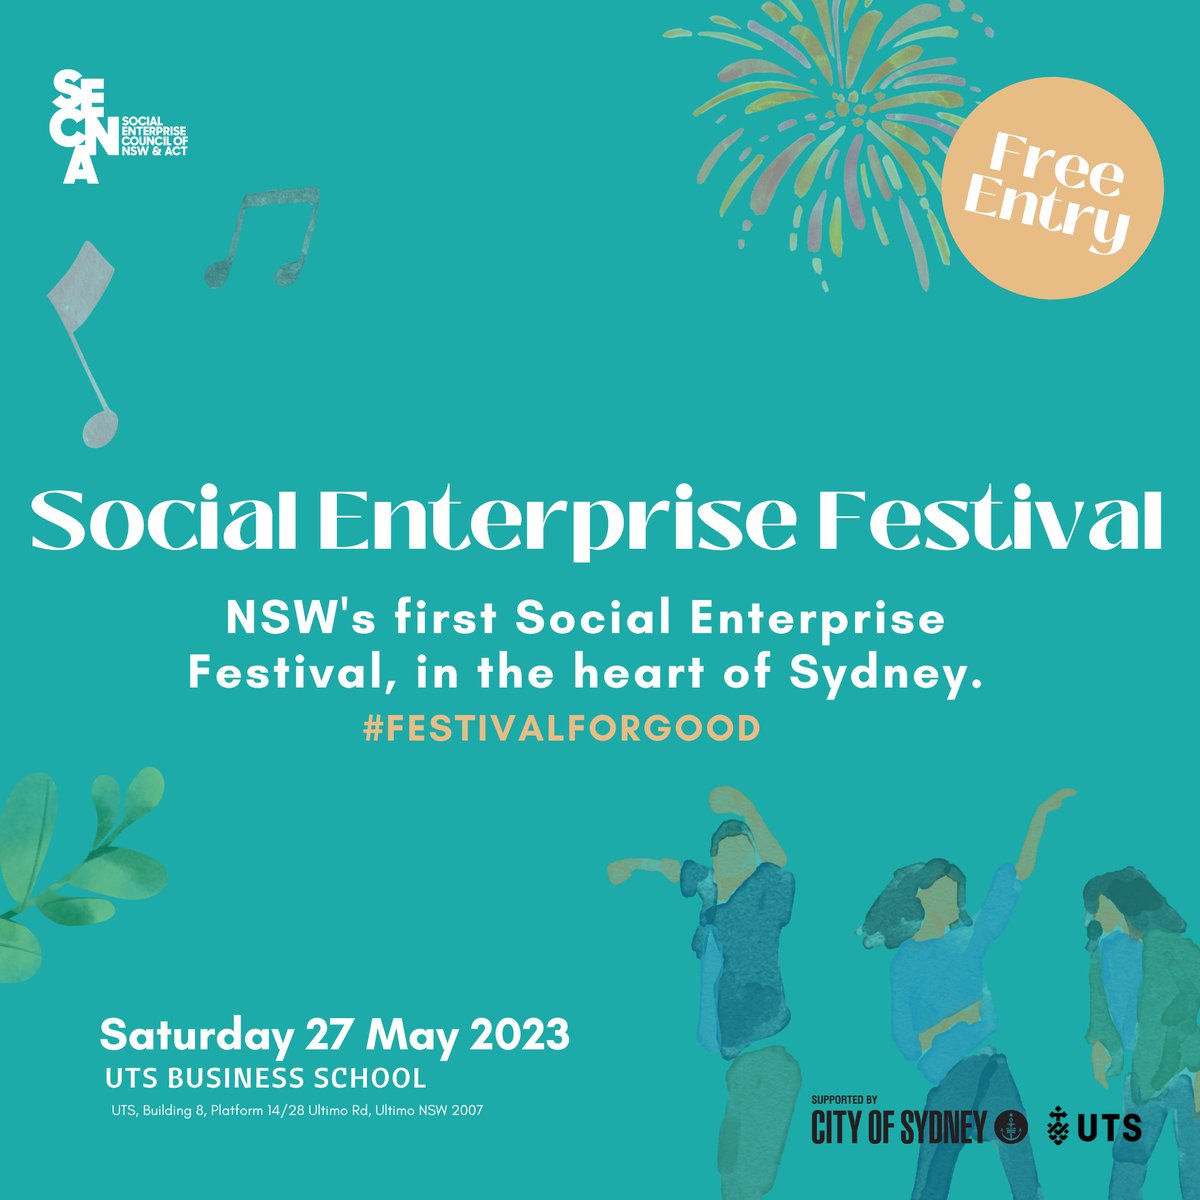 Join StartSomeGood at Sydney's first #SocialEnterpriseFestival on May 27th! Discover goods that make the world better, network with like-minded individuals, and have a great day out with family and friends. 

Entrance is #FREE. See you there! events.humanitix.com/social-enterpr… #socent